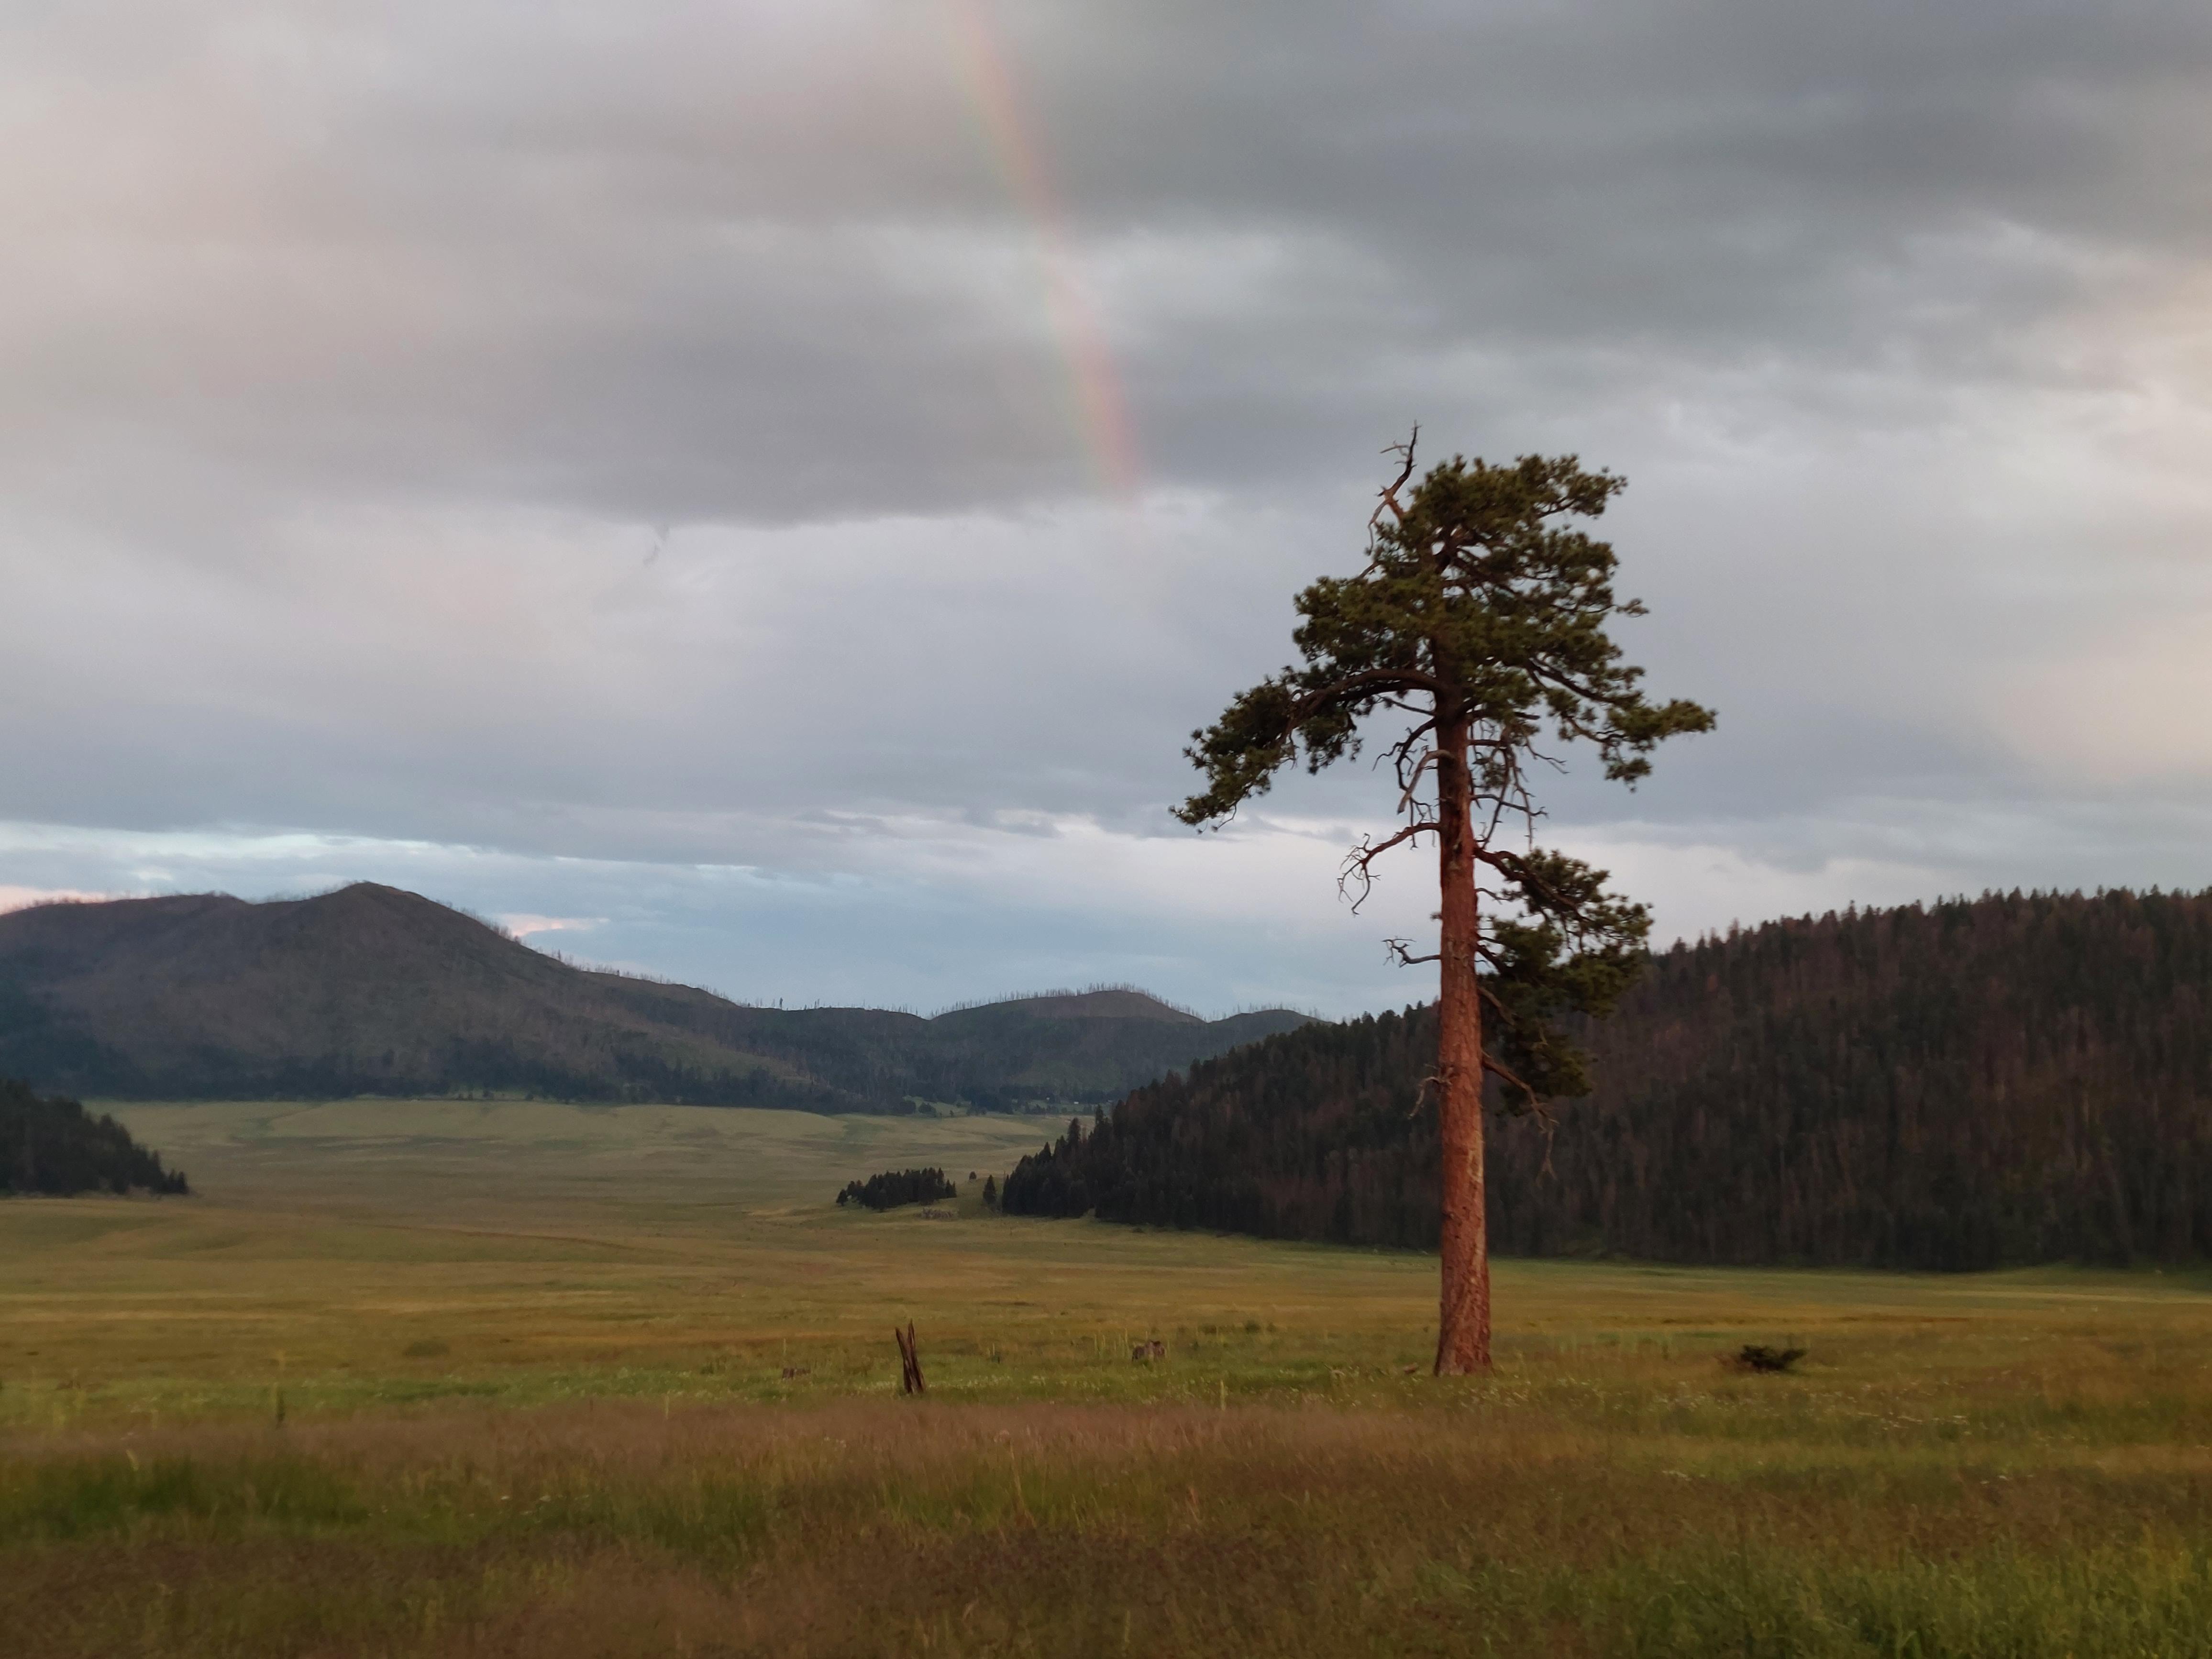 A rainbow coming down across a grassy valley with a pine tree.